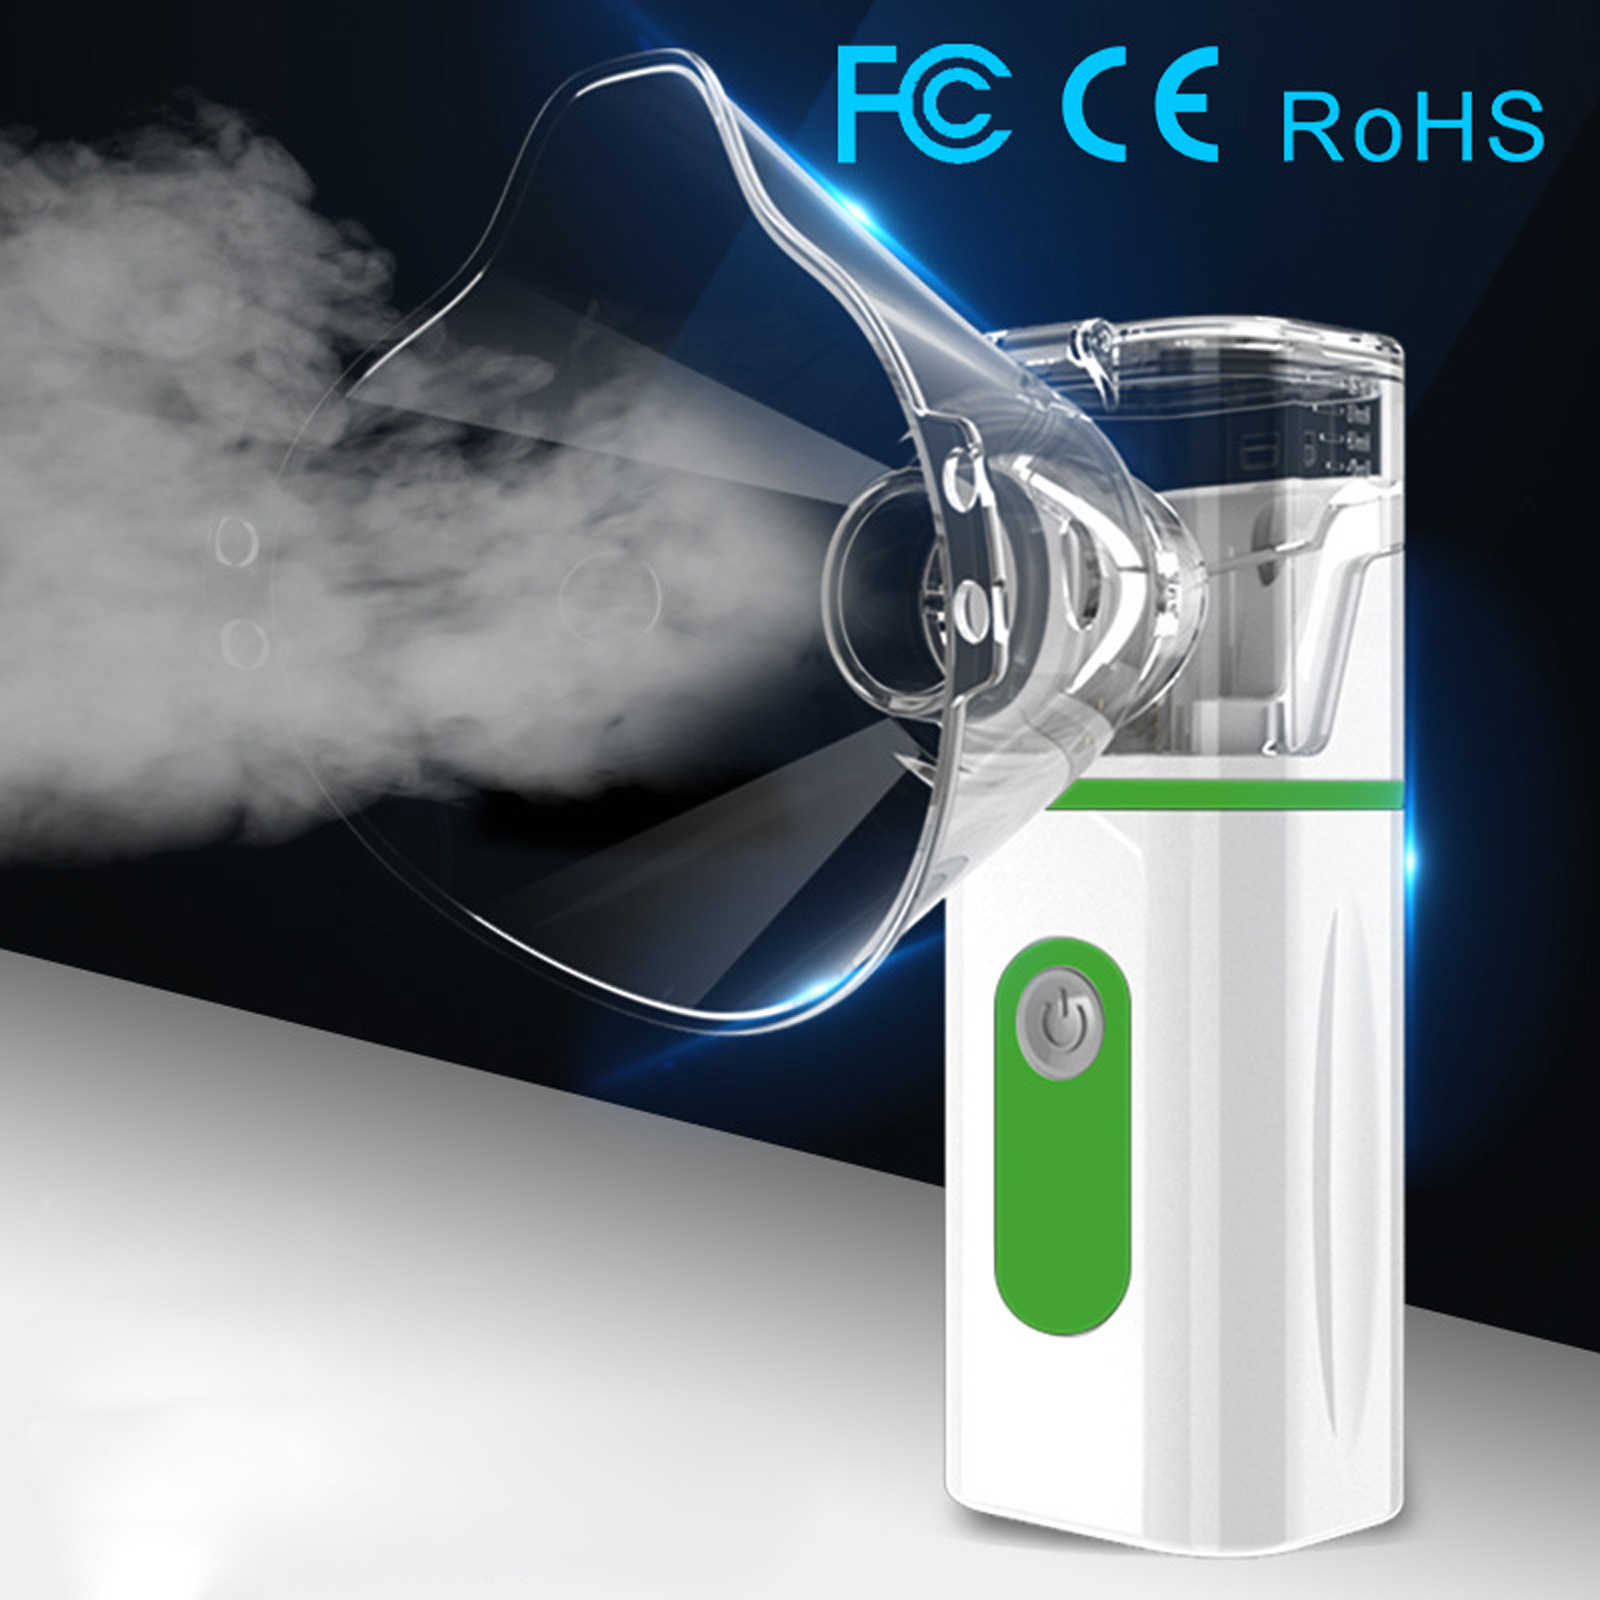 Portable Handheld Ultrasonic Nebulizer Phlegm Cough Relieving Pocket Machine for Home Travel